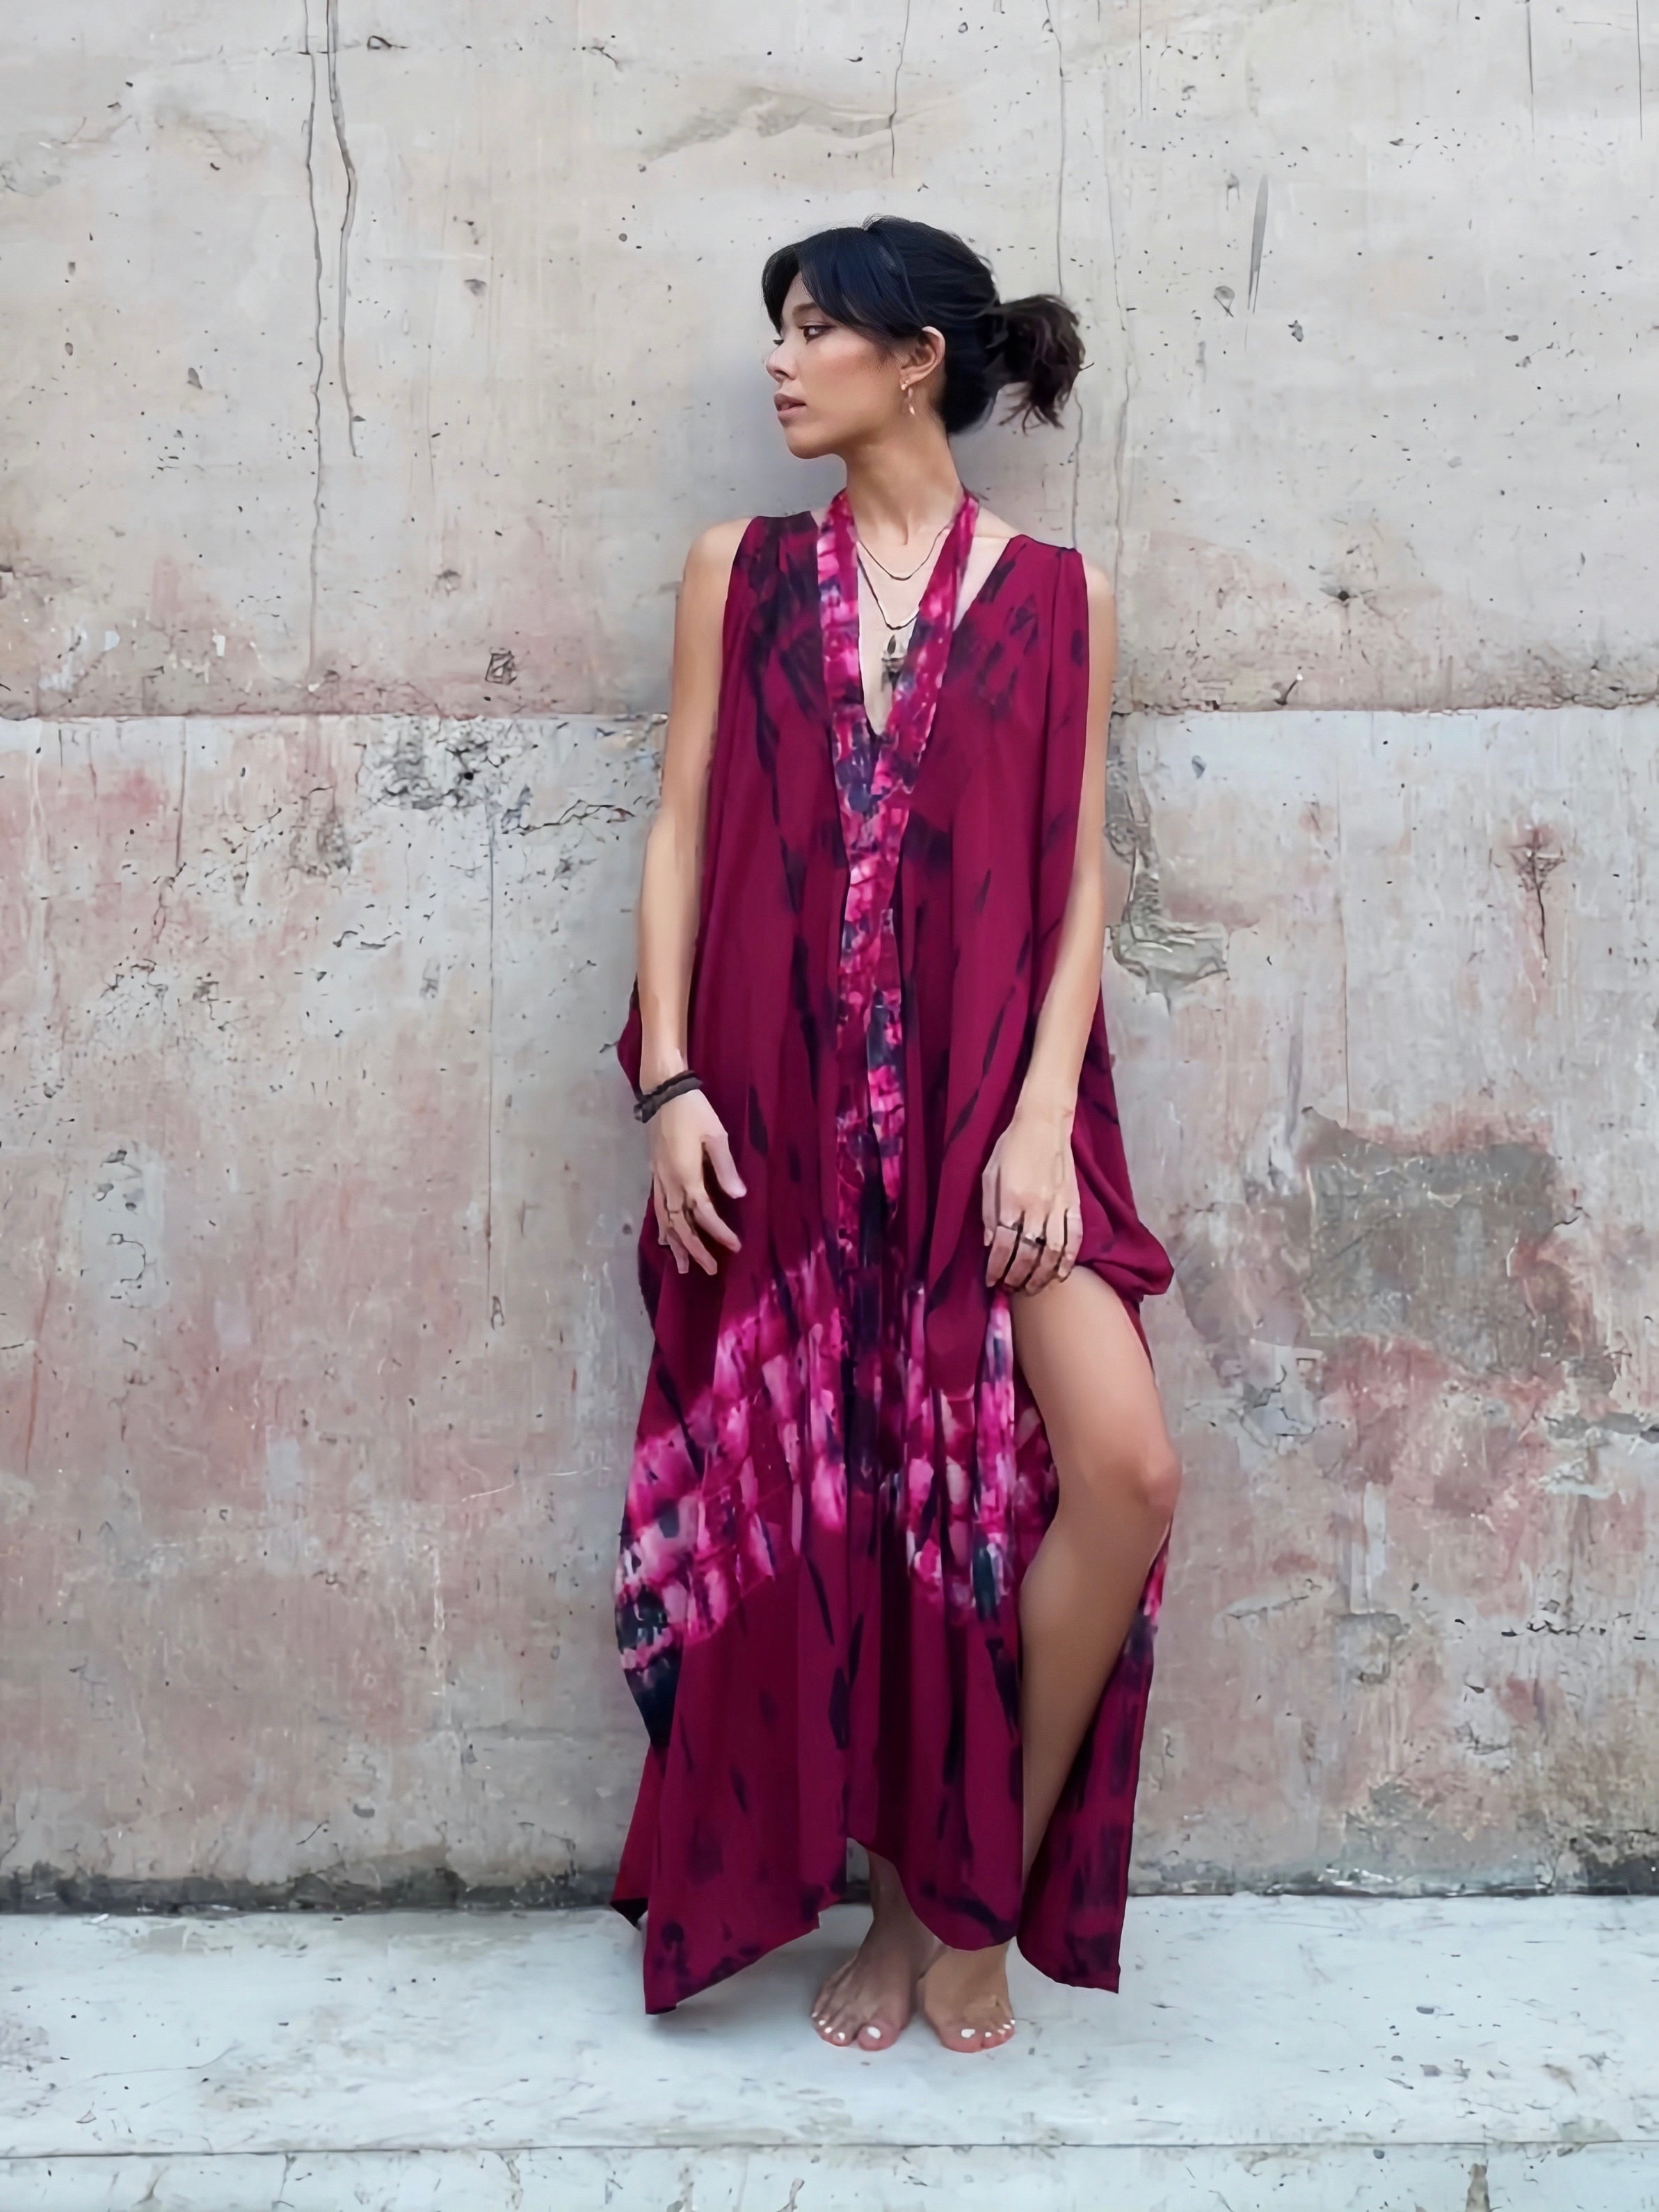 Shop our Fara Tie-Dye Kaftan, a one-of-a-kind convertible dress suitable for every occasion. This sustainable dress exudes a captivating bohemian charm that's both eco-friendly and stylish. Wear it as a maxi dress for beach dress, style it as a bohemian dress for a festival, or throw it on as a beach cover-up. Show off your free-spirited style wherever you go!